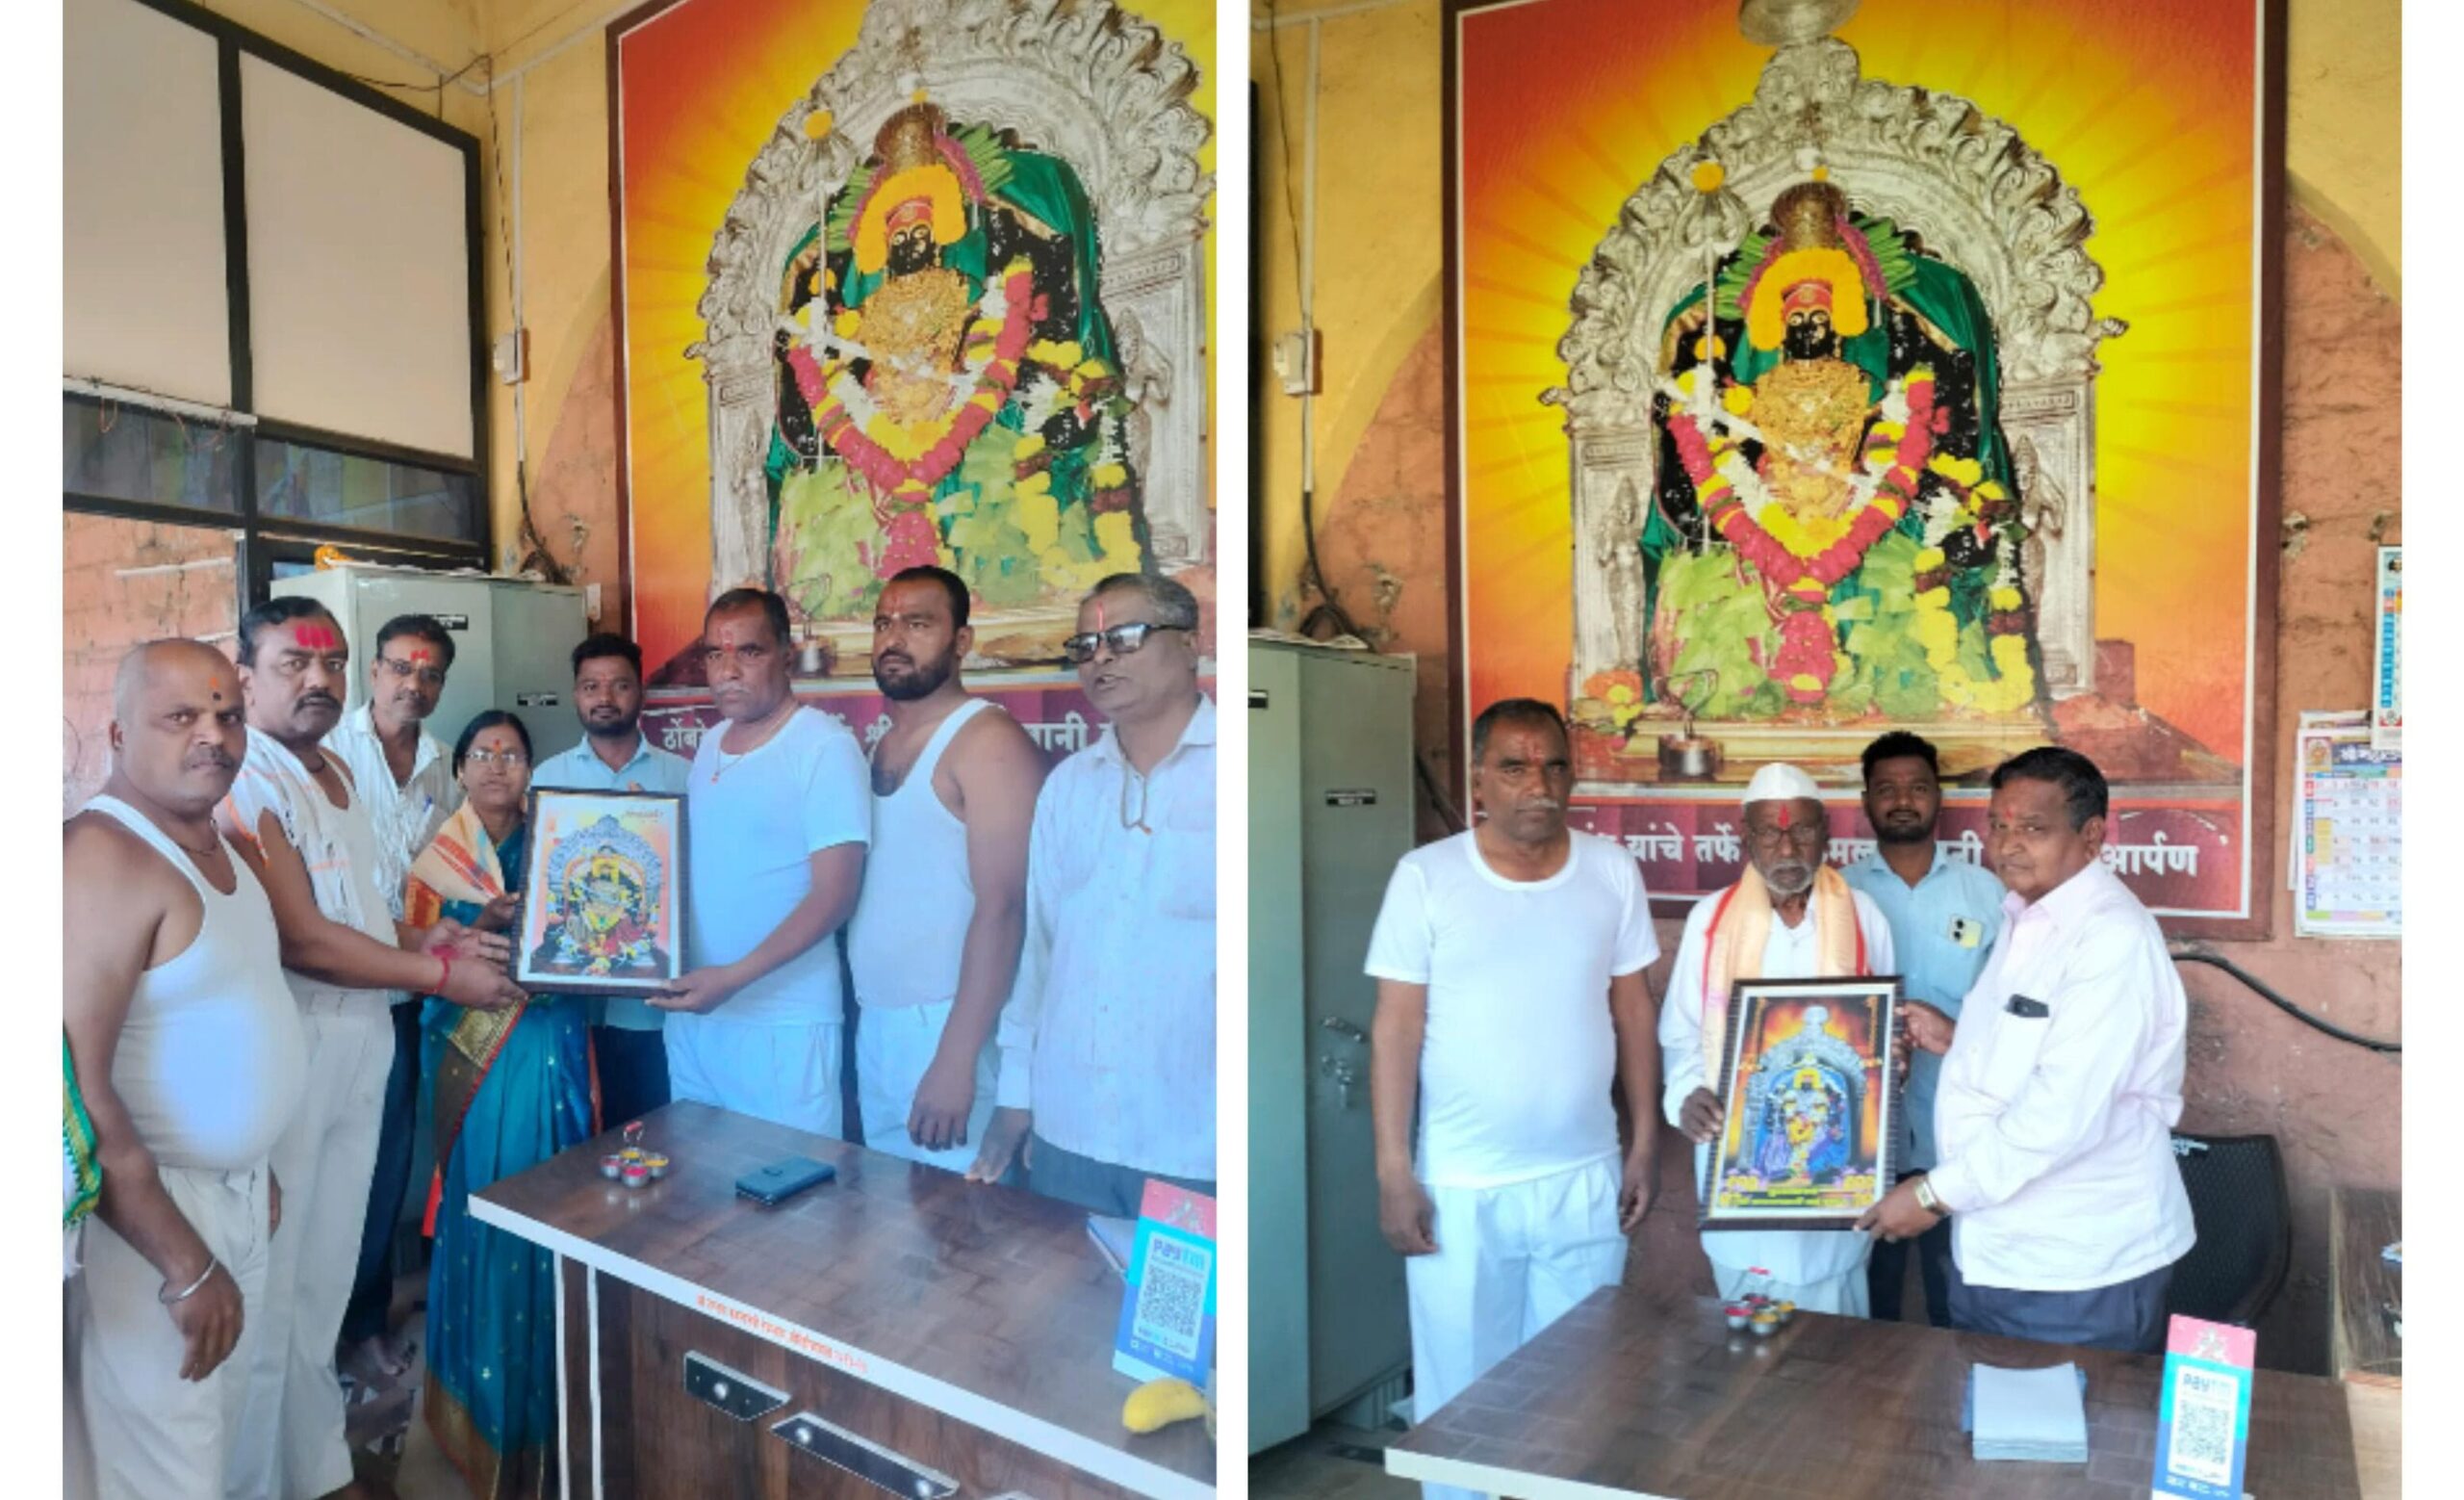 Donation of 11 thousand for preservation and conservation of Sri Kamaladevi temple